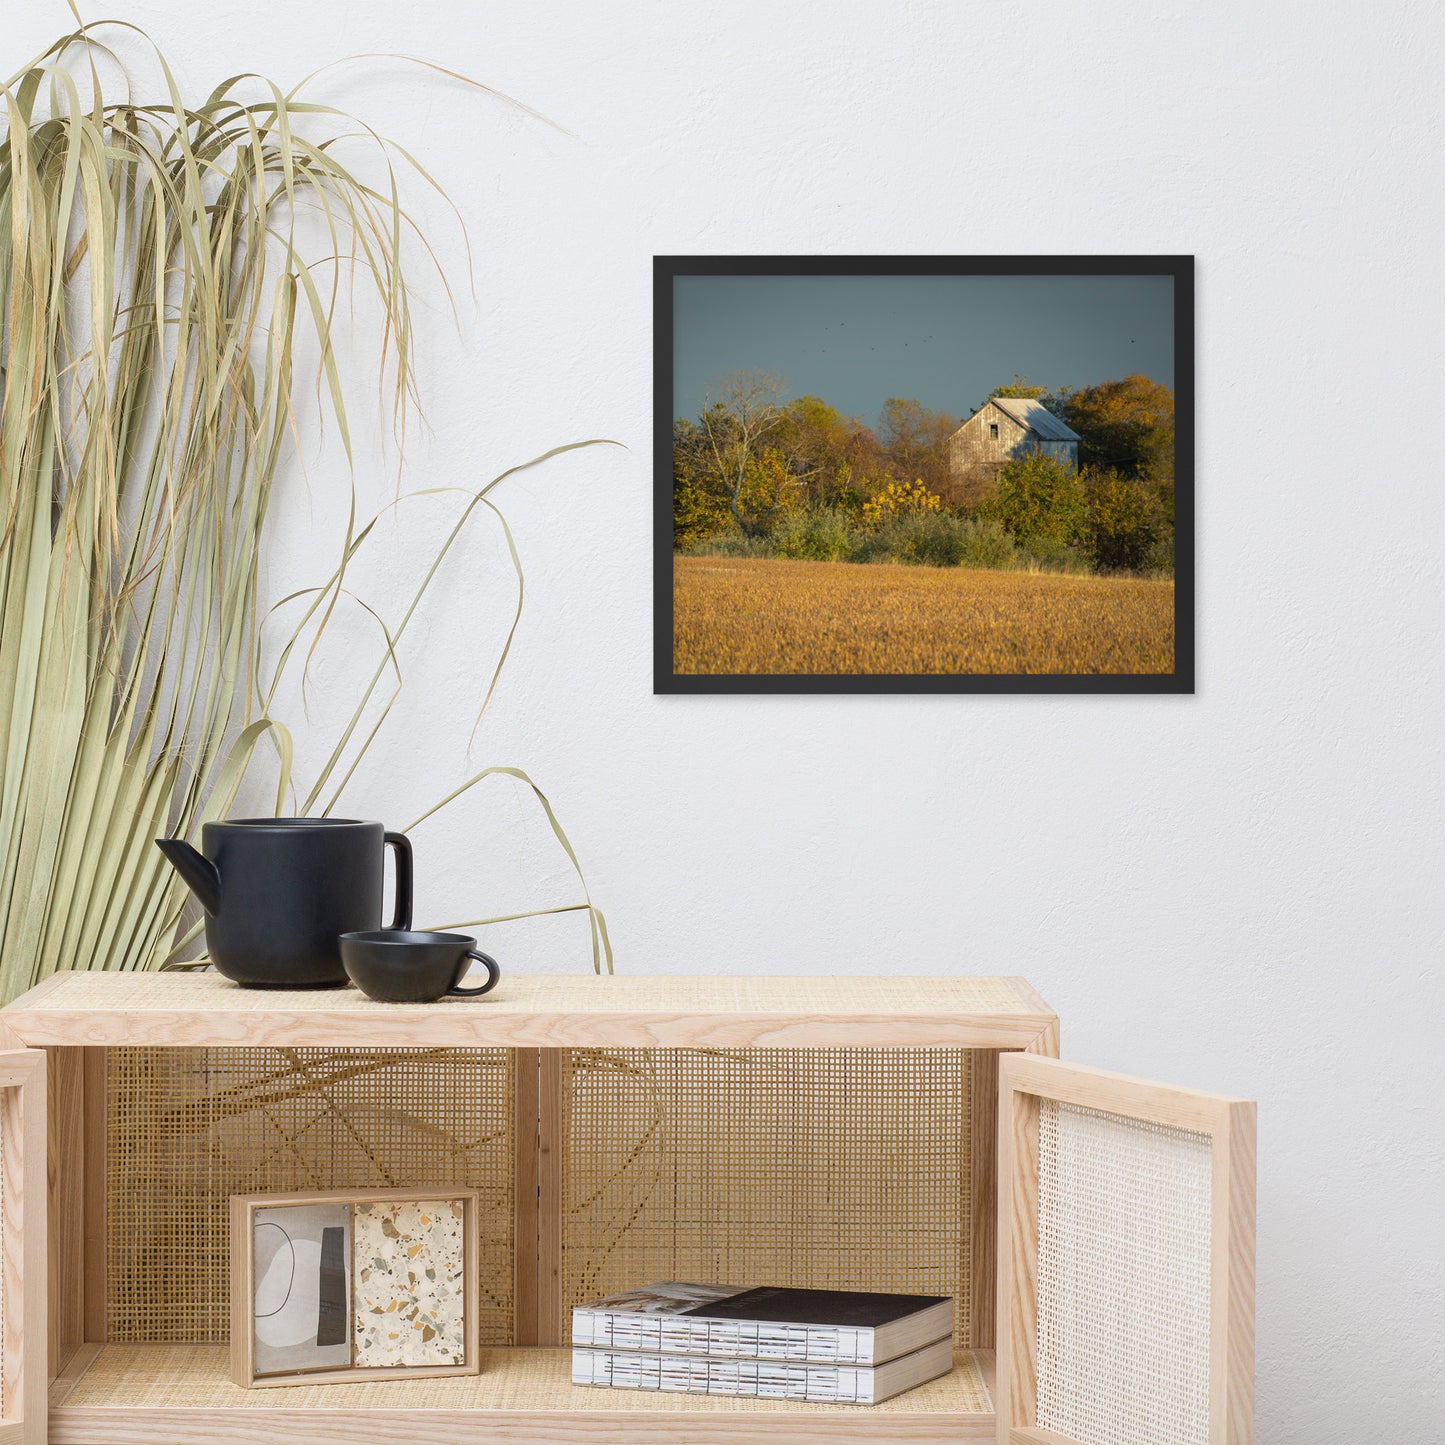 Farmhouse Rustic Wall Art: Abandoned Barn In The Trees Framed Photo Rustic / Country Style Landscape Photography Wall Art Prints - Artwork - Wall Decor